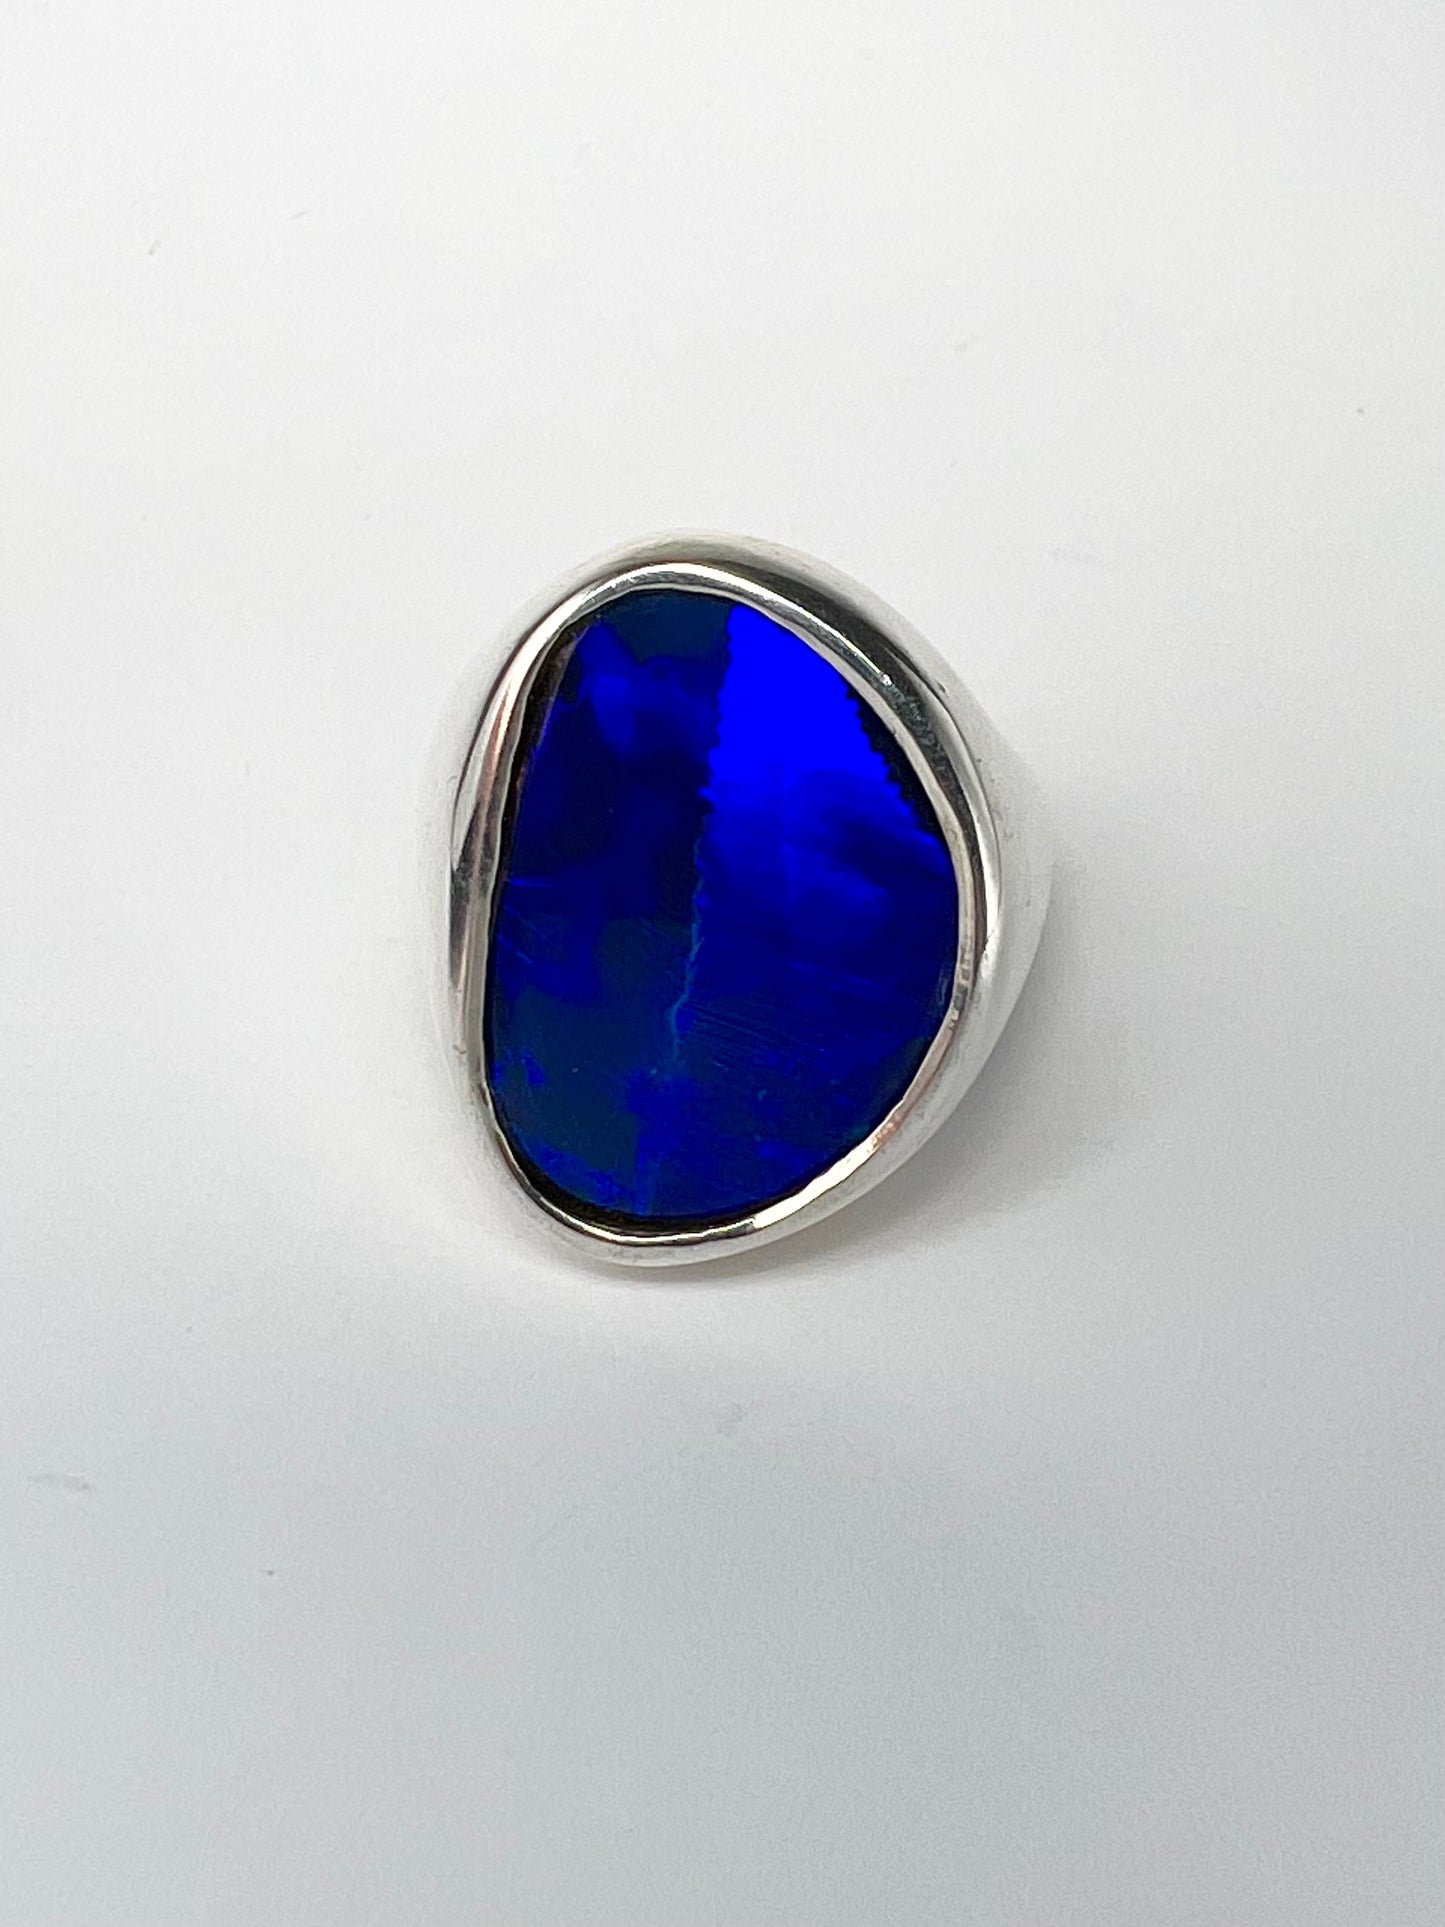 Black Opal and Sterling Siver Ring